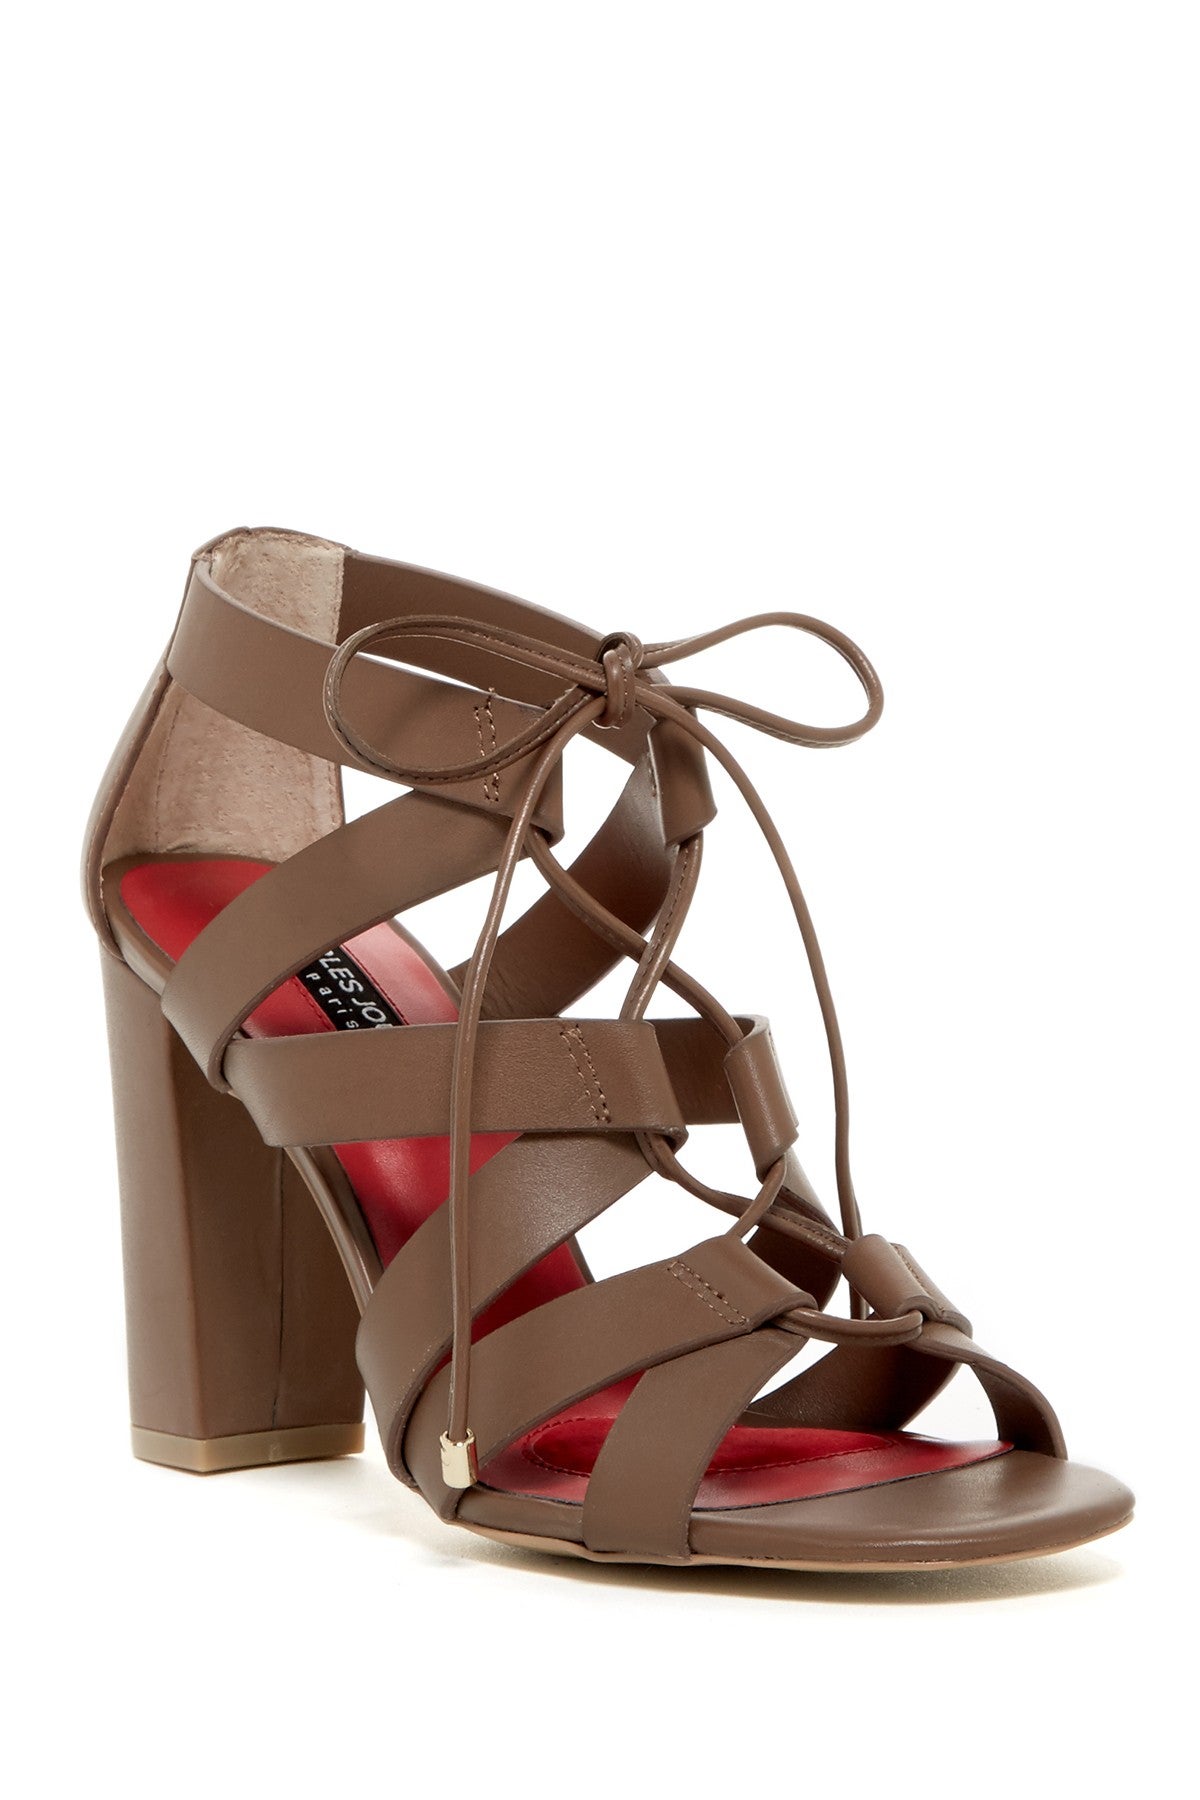 Nude Cork Ankle Straps Wedged Platforms Wedges Strappy 